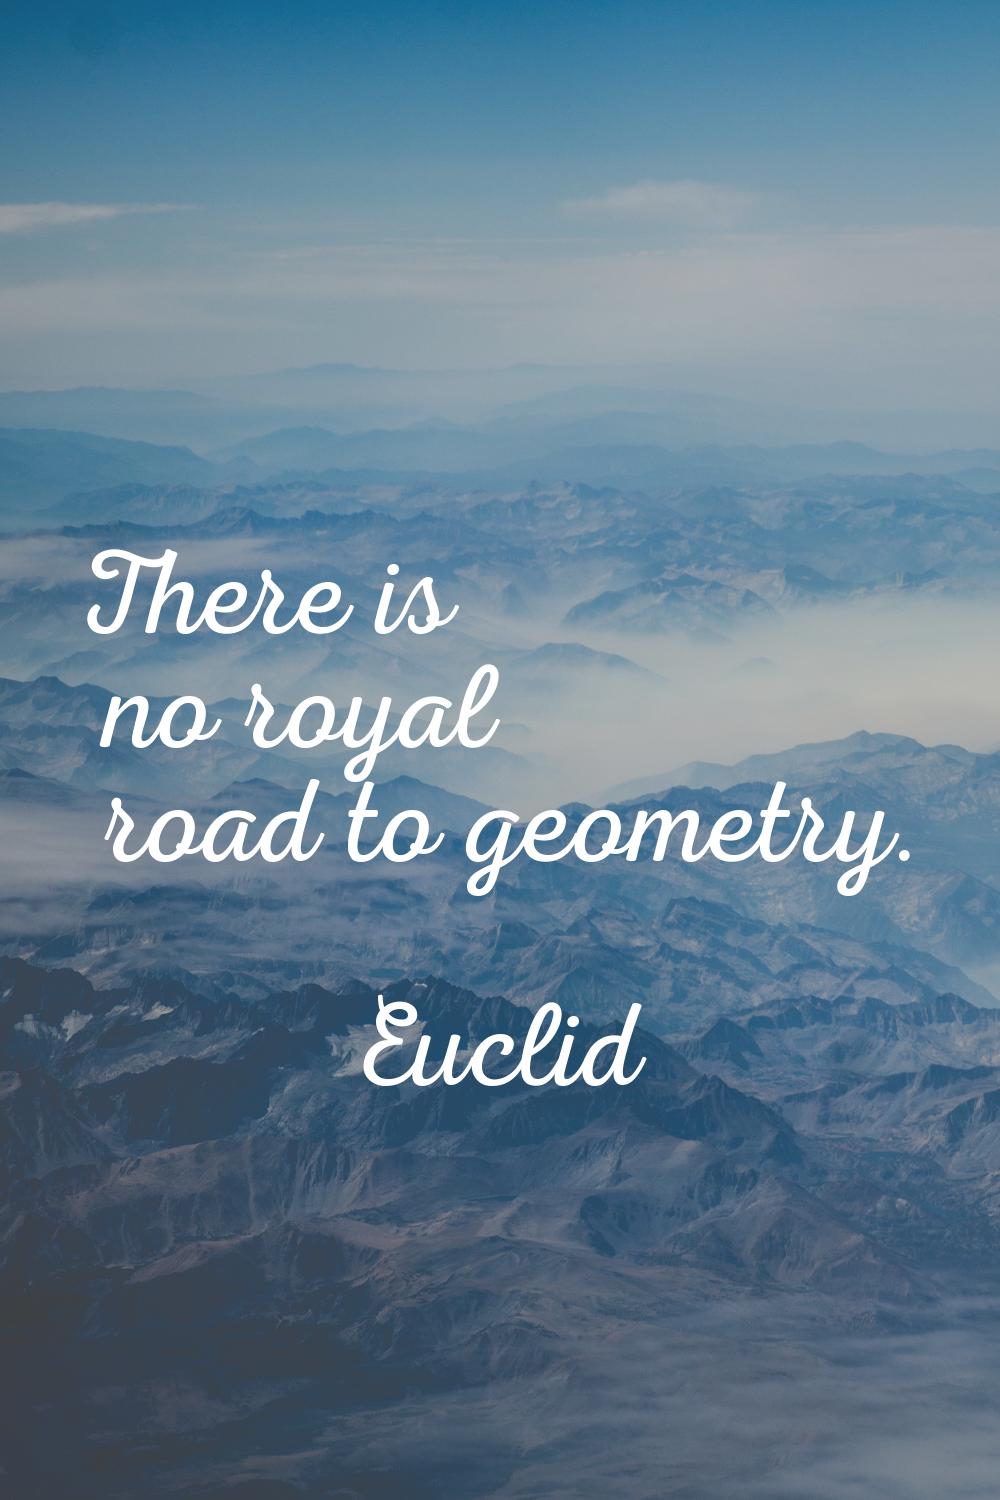 There is no royal road to geometry.